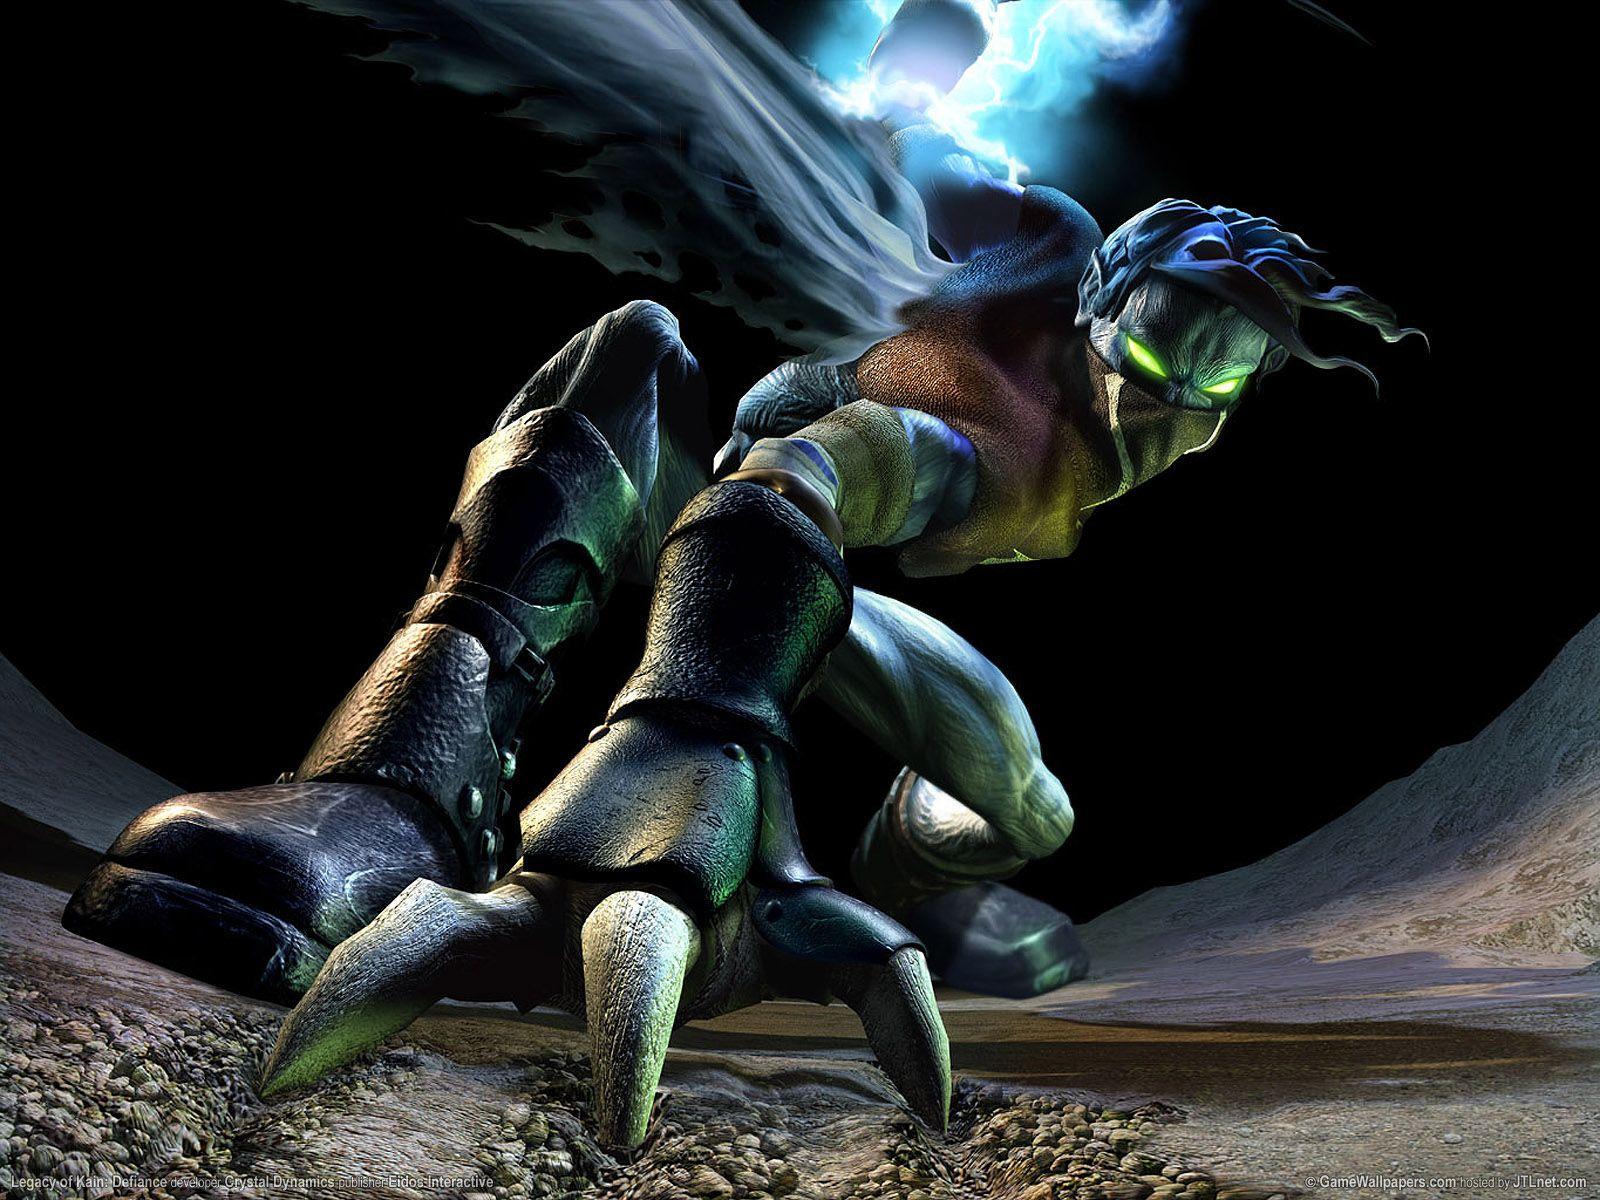 Legacy of Kain: Defiance wallpaper. Legacy of Kain: Defiance stock